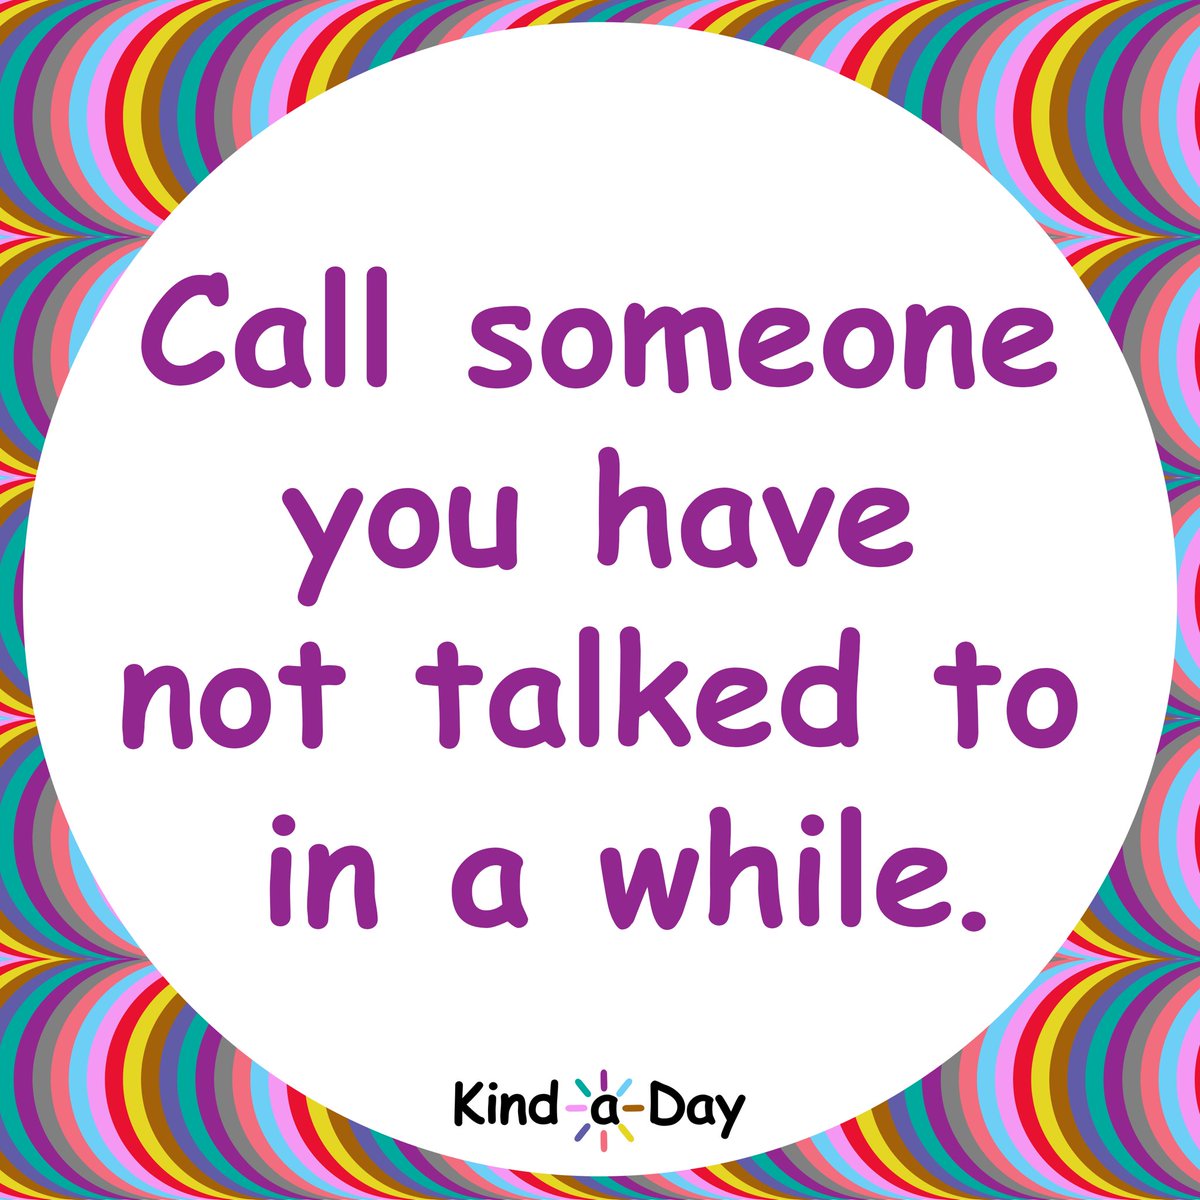 Tuesday Tip: Call someone you have not talked to in a while. 💕
 
#CallAFriend #CallAFamilyMember #BeKind #kind #kindness #KindLife #ActsOfKindness #SpreadKindness #KindnessMatters #ChooseKindness #KindnessWins #KindaDay #KindnessAlways #KindnessEveryday #Kindness365